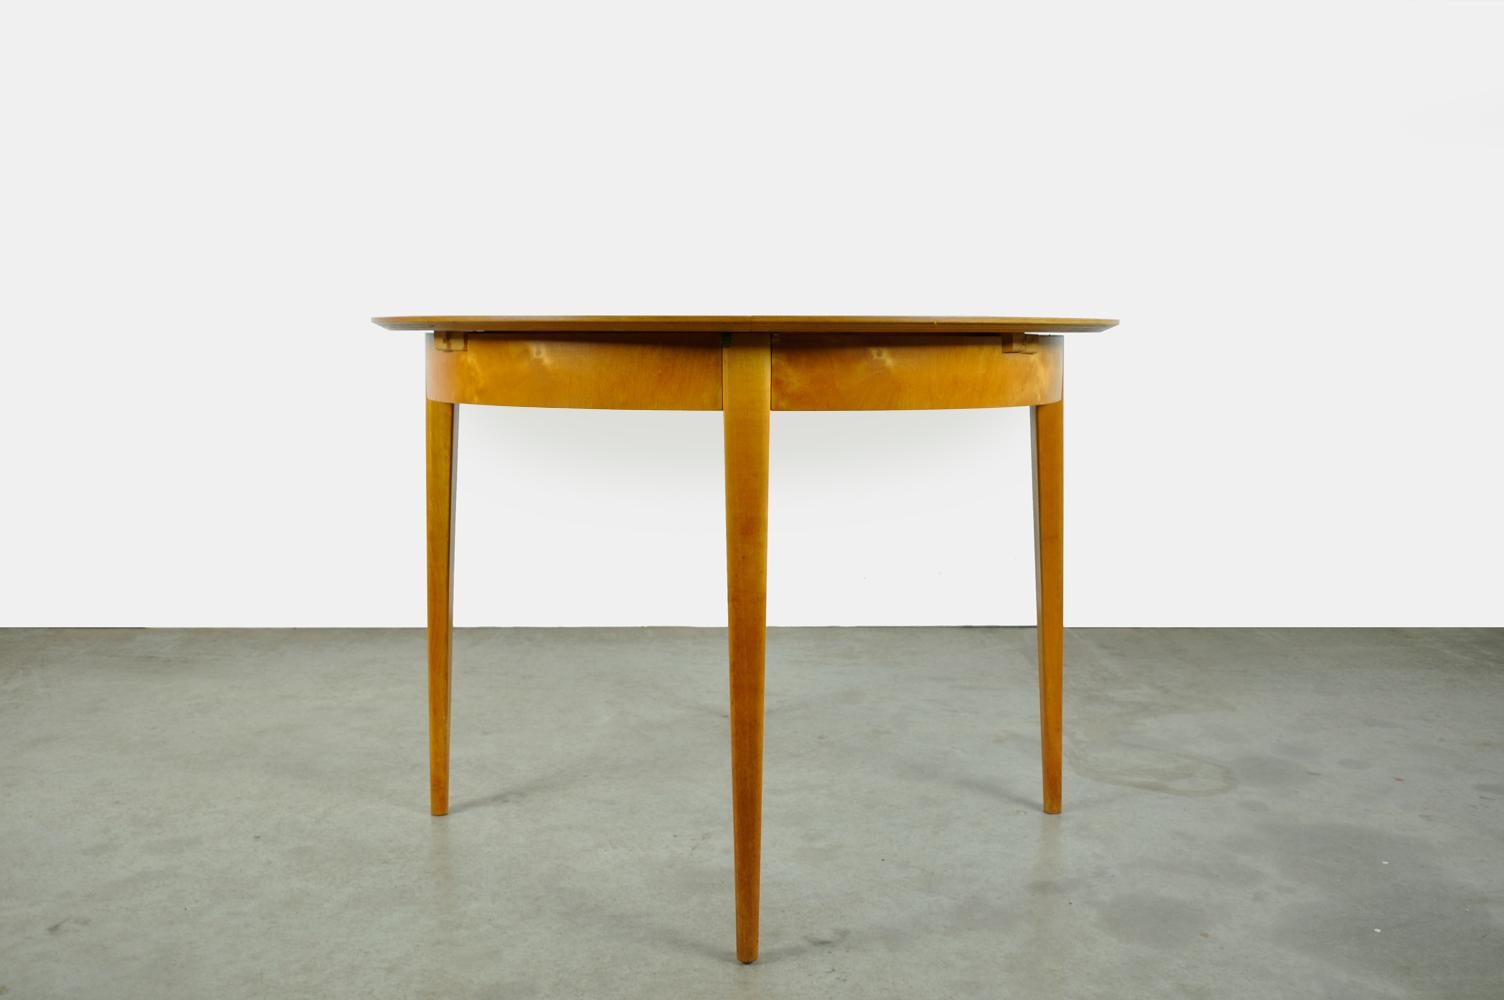 4-6 person extendable dining table TB35 designed by Cees Braakman for Pastoe, 1950s. The table has a beautiful combination of birch and teak veneer finishes. The round top, with a beautiful detailed edge, is made of teak wood. The frame is finished